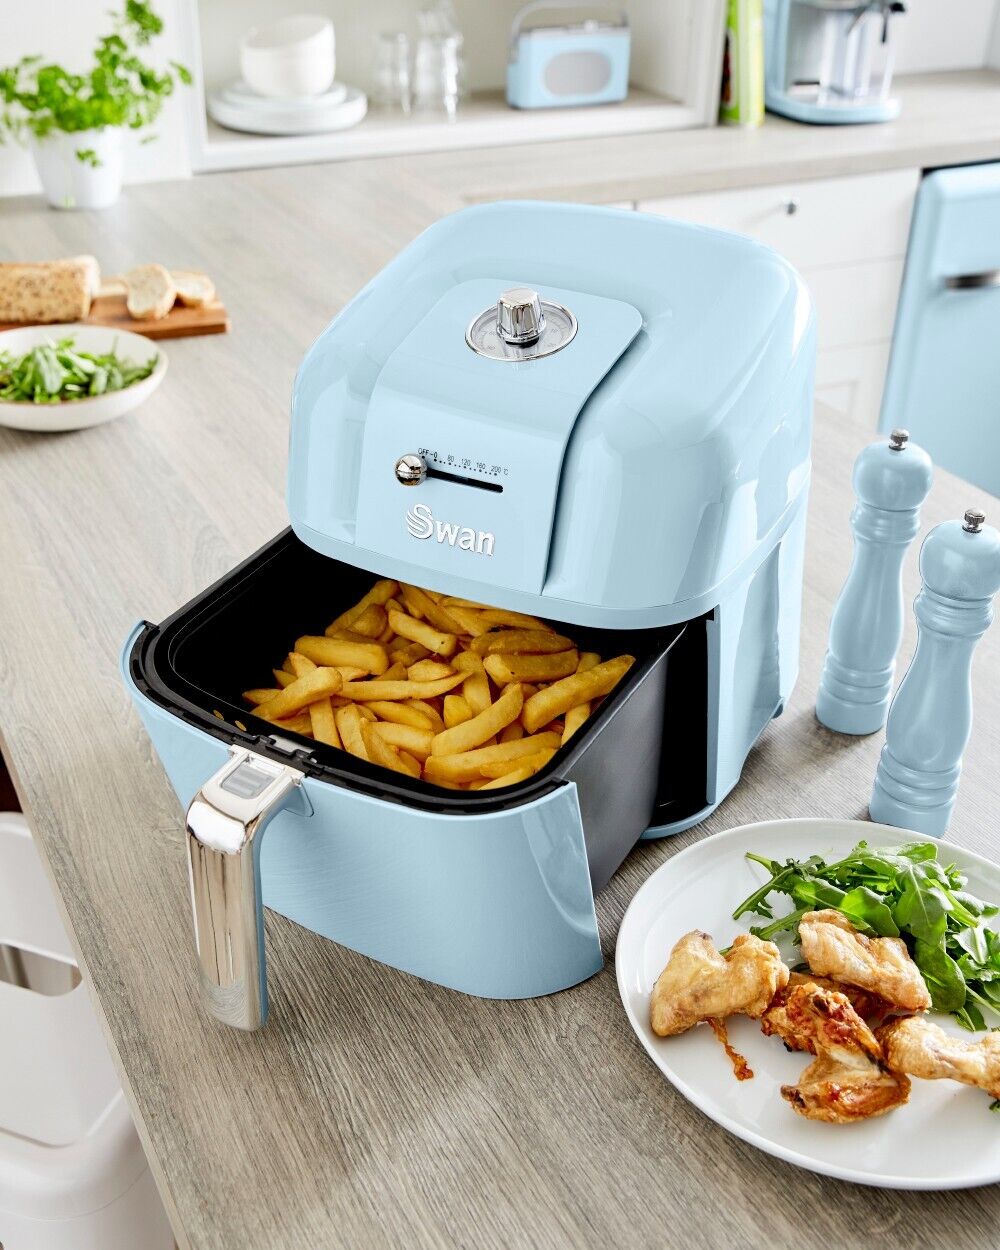 Swan Retro Air Fryer 6L in Blue  Healthy Energy Efficient Cooking for the Family